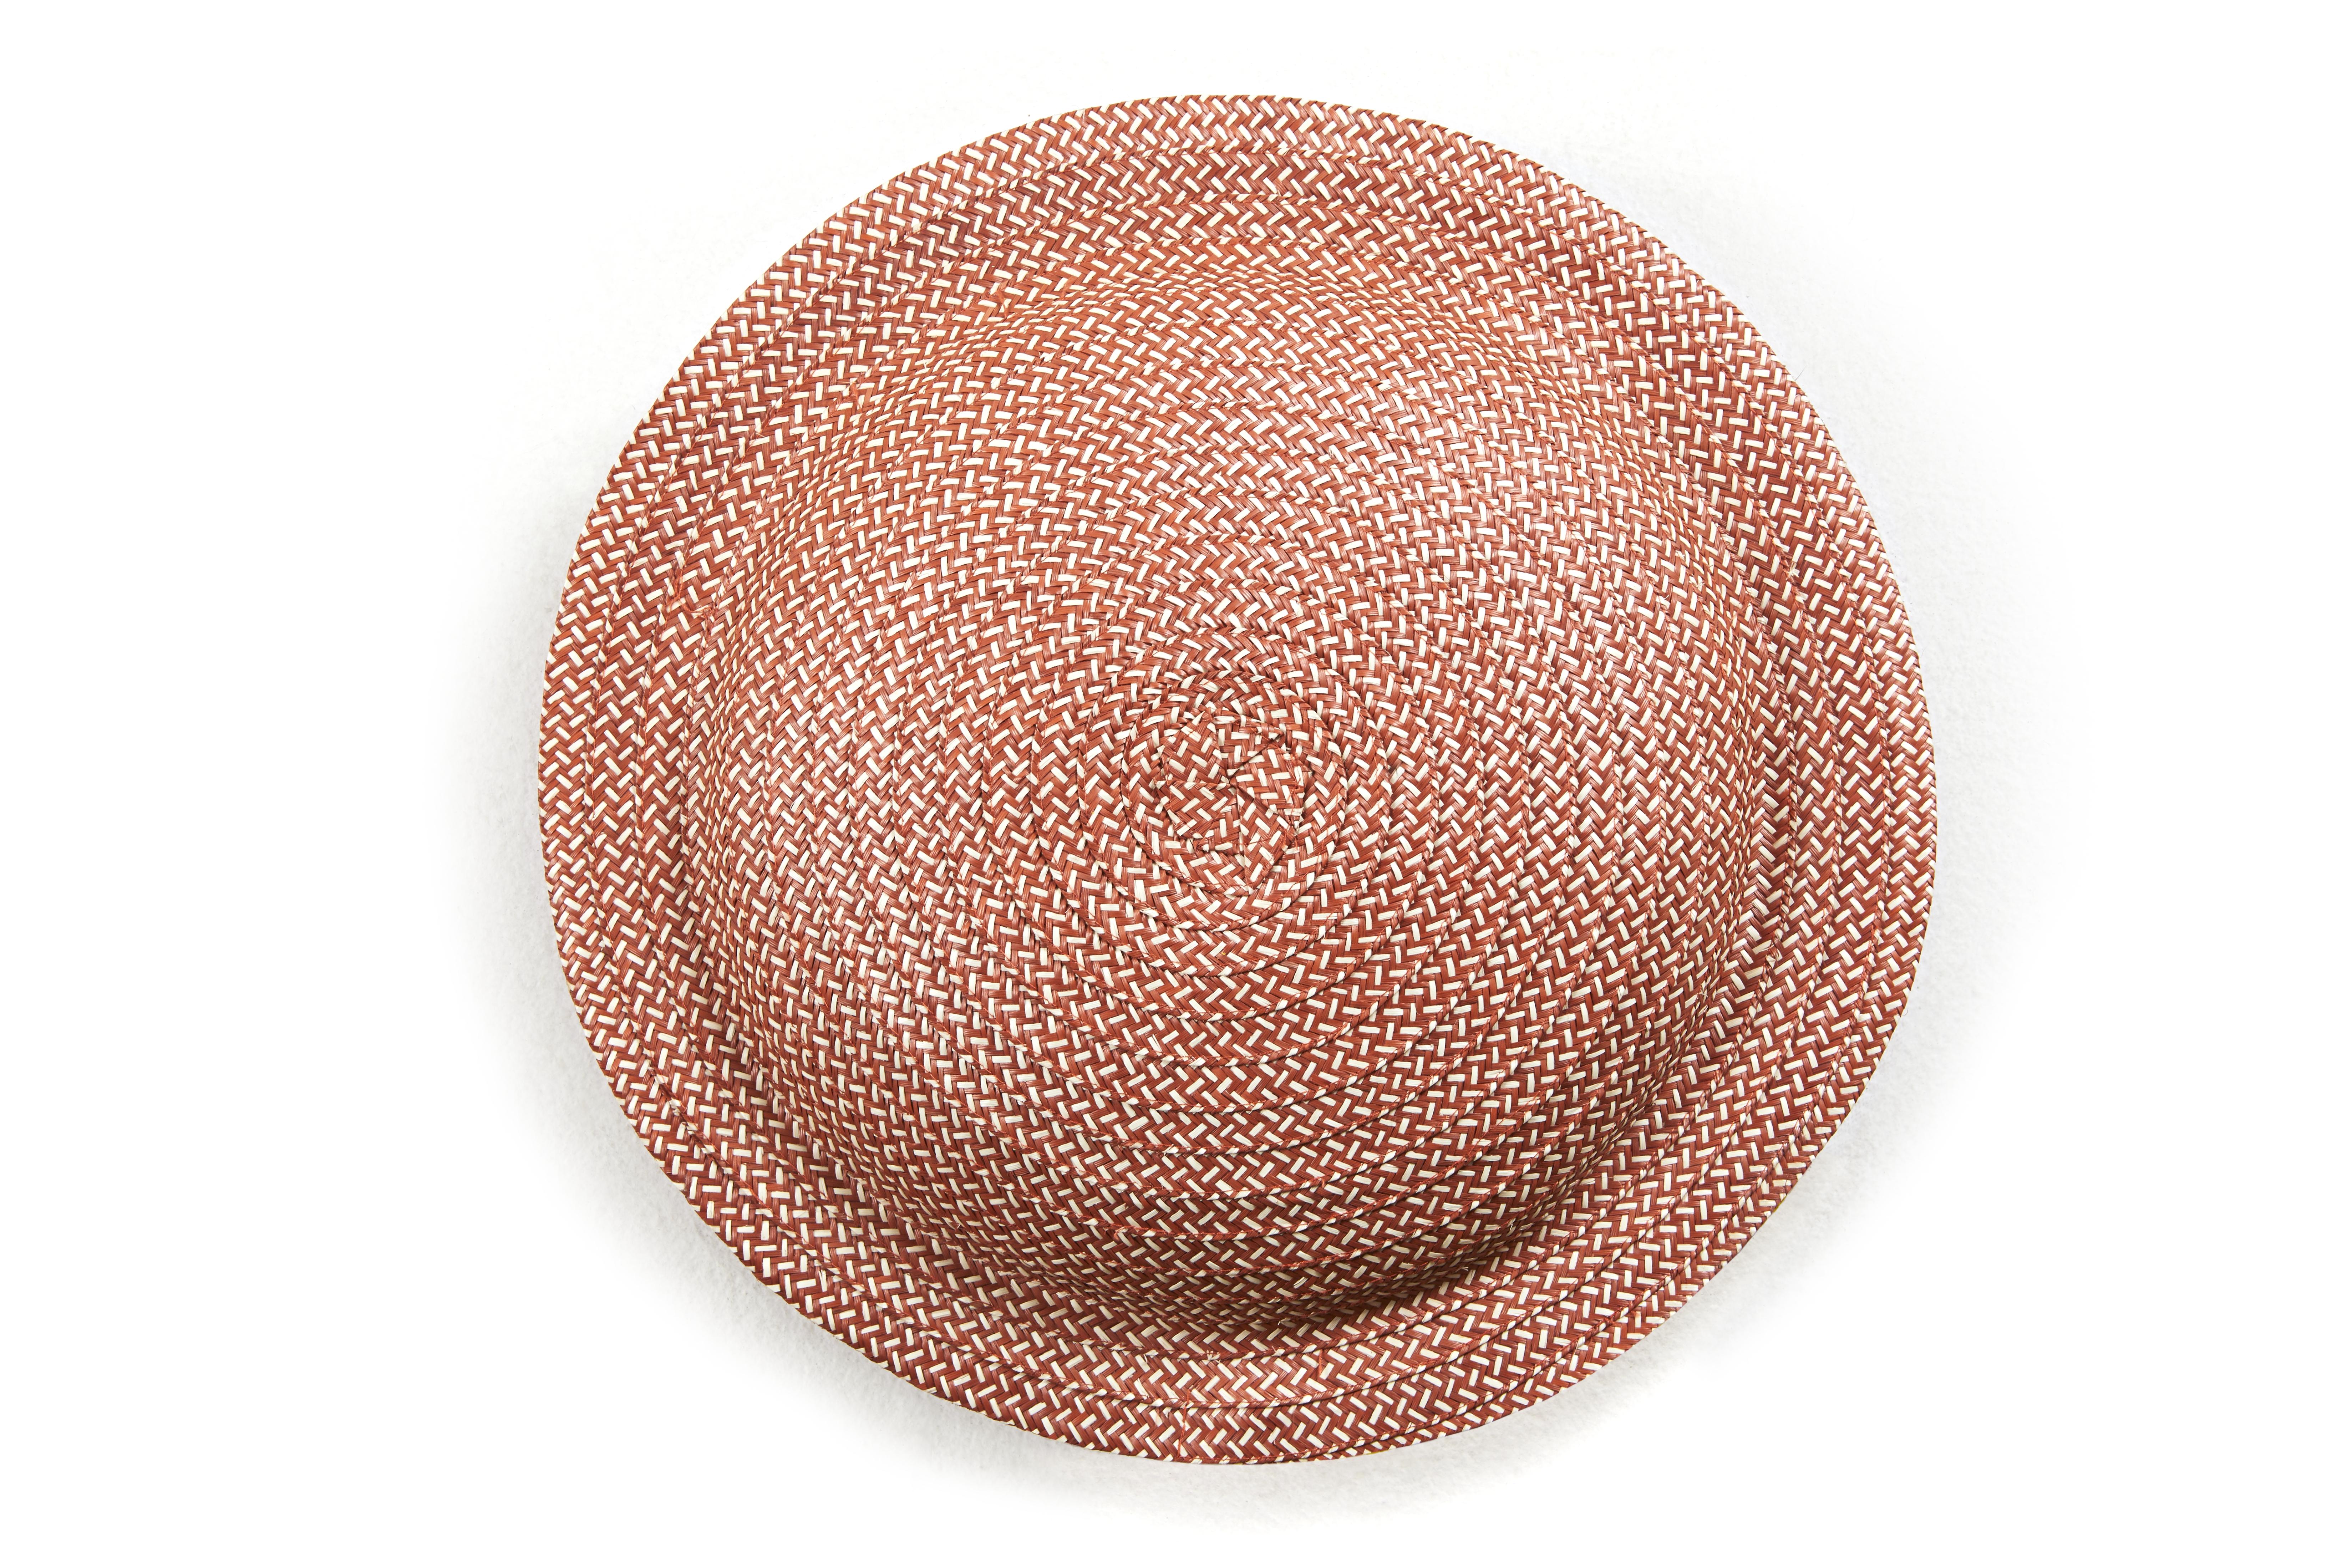 Red Cana stool by Pauline Deltour by Cristina Celestino.
Materials: galvanized and powder-coated tubular steel. Caña Flecha.
Technique: hand-woven with natural fibers in Colombia. Natural dyed. 
Dimensions: diameter 40.2 x height 48.1 cm